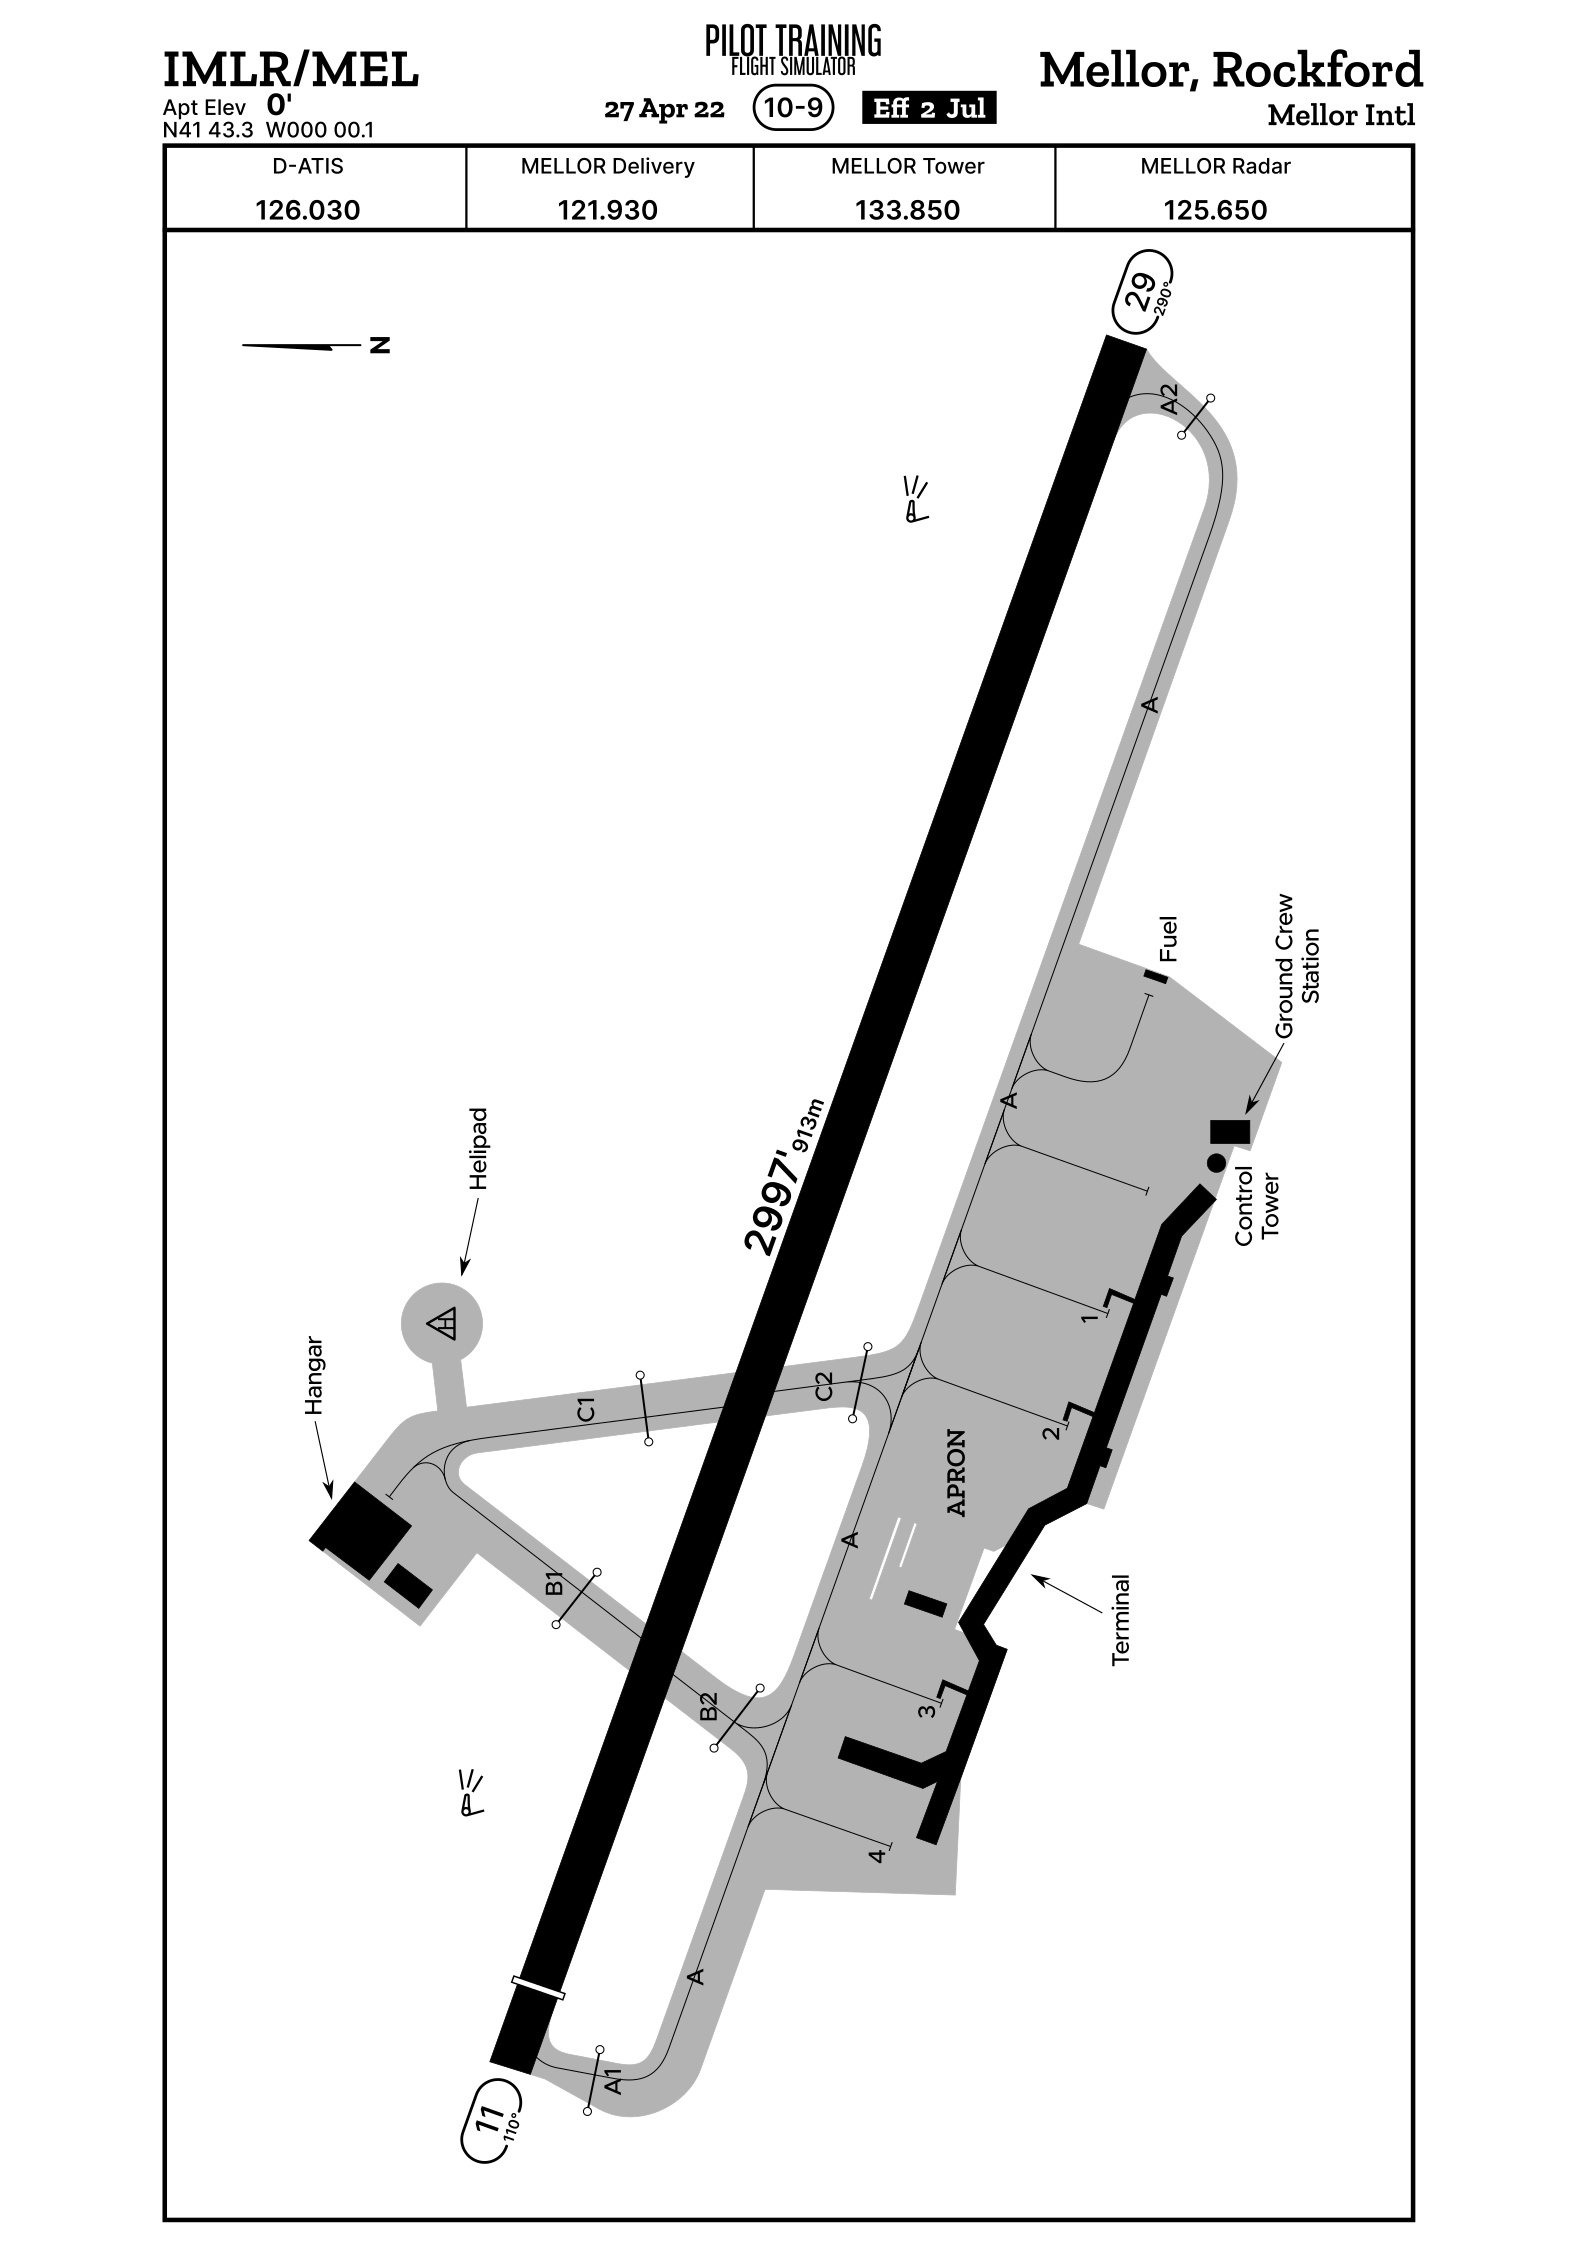 Airport ground chart for the airport IMLR